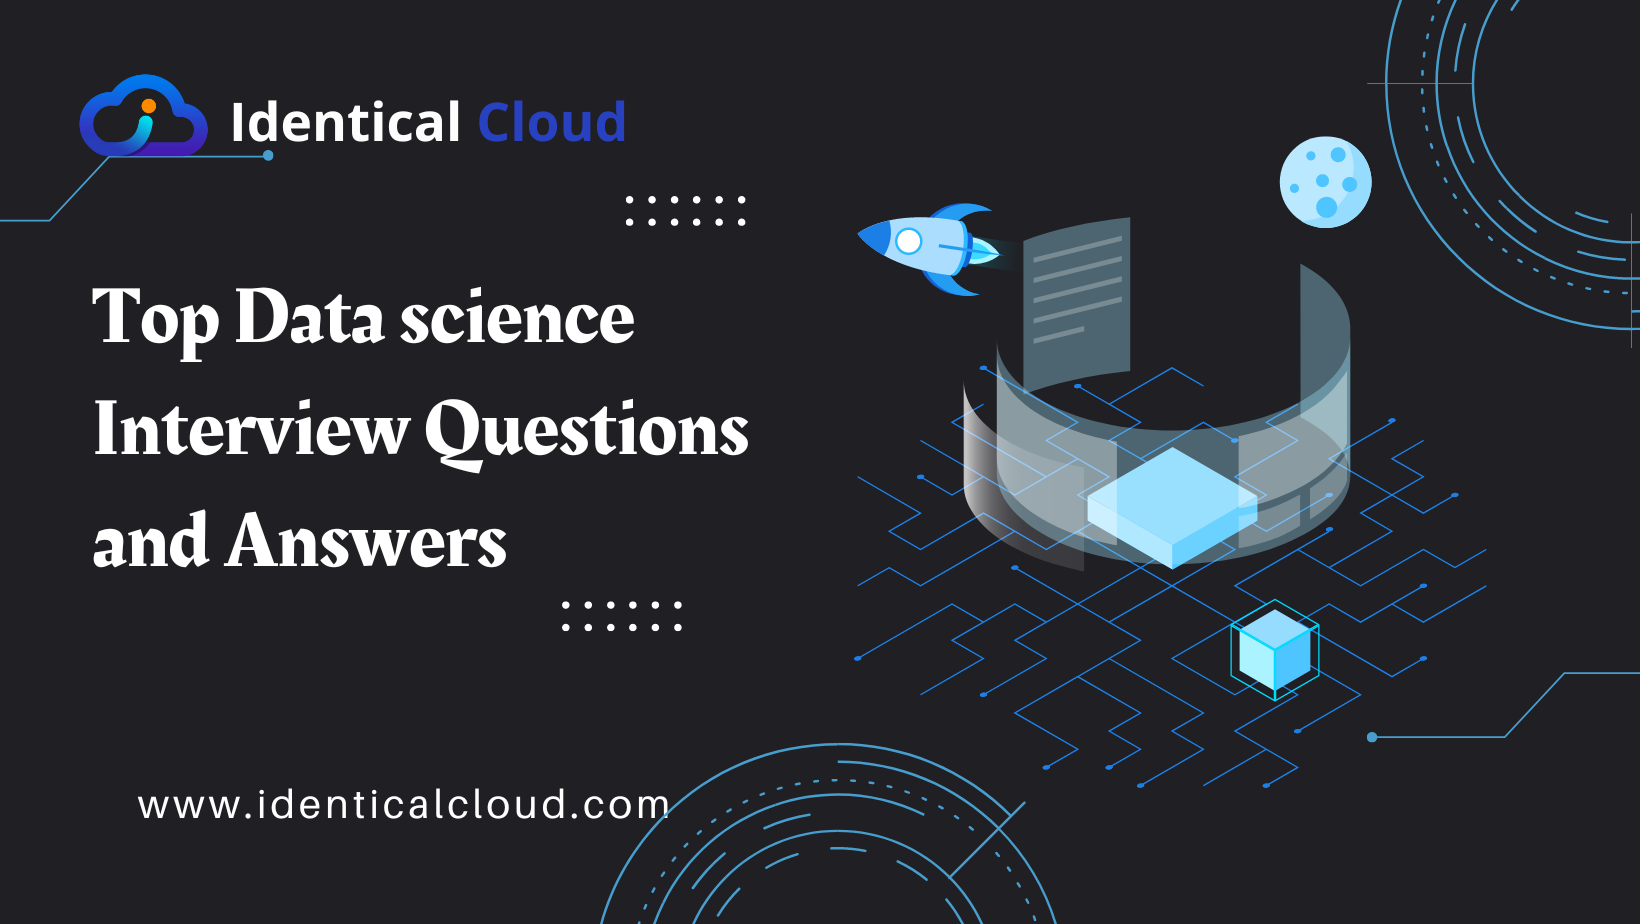 Top Data science Interview Questions and Answers - identicalcloud.com